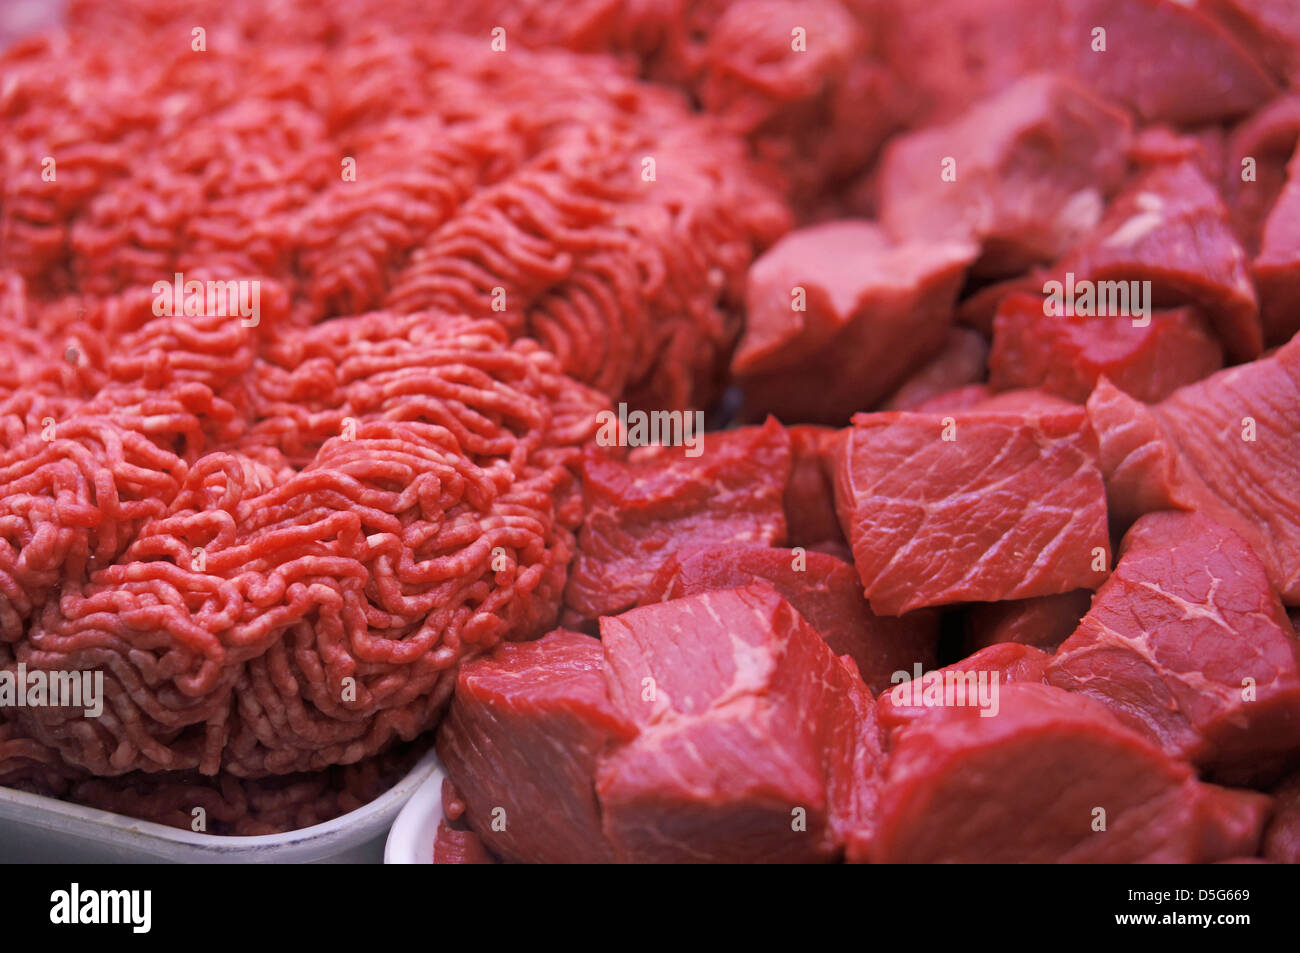 https://c8.alamy.com/comp/D5G669/ground-beef-and-cubes-raw-meat-chopped-pieces-D5G669.jpg